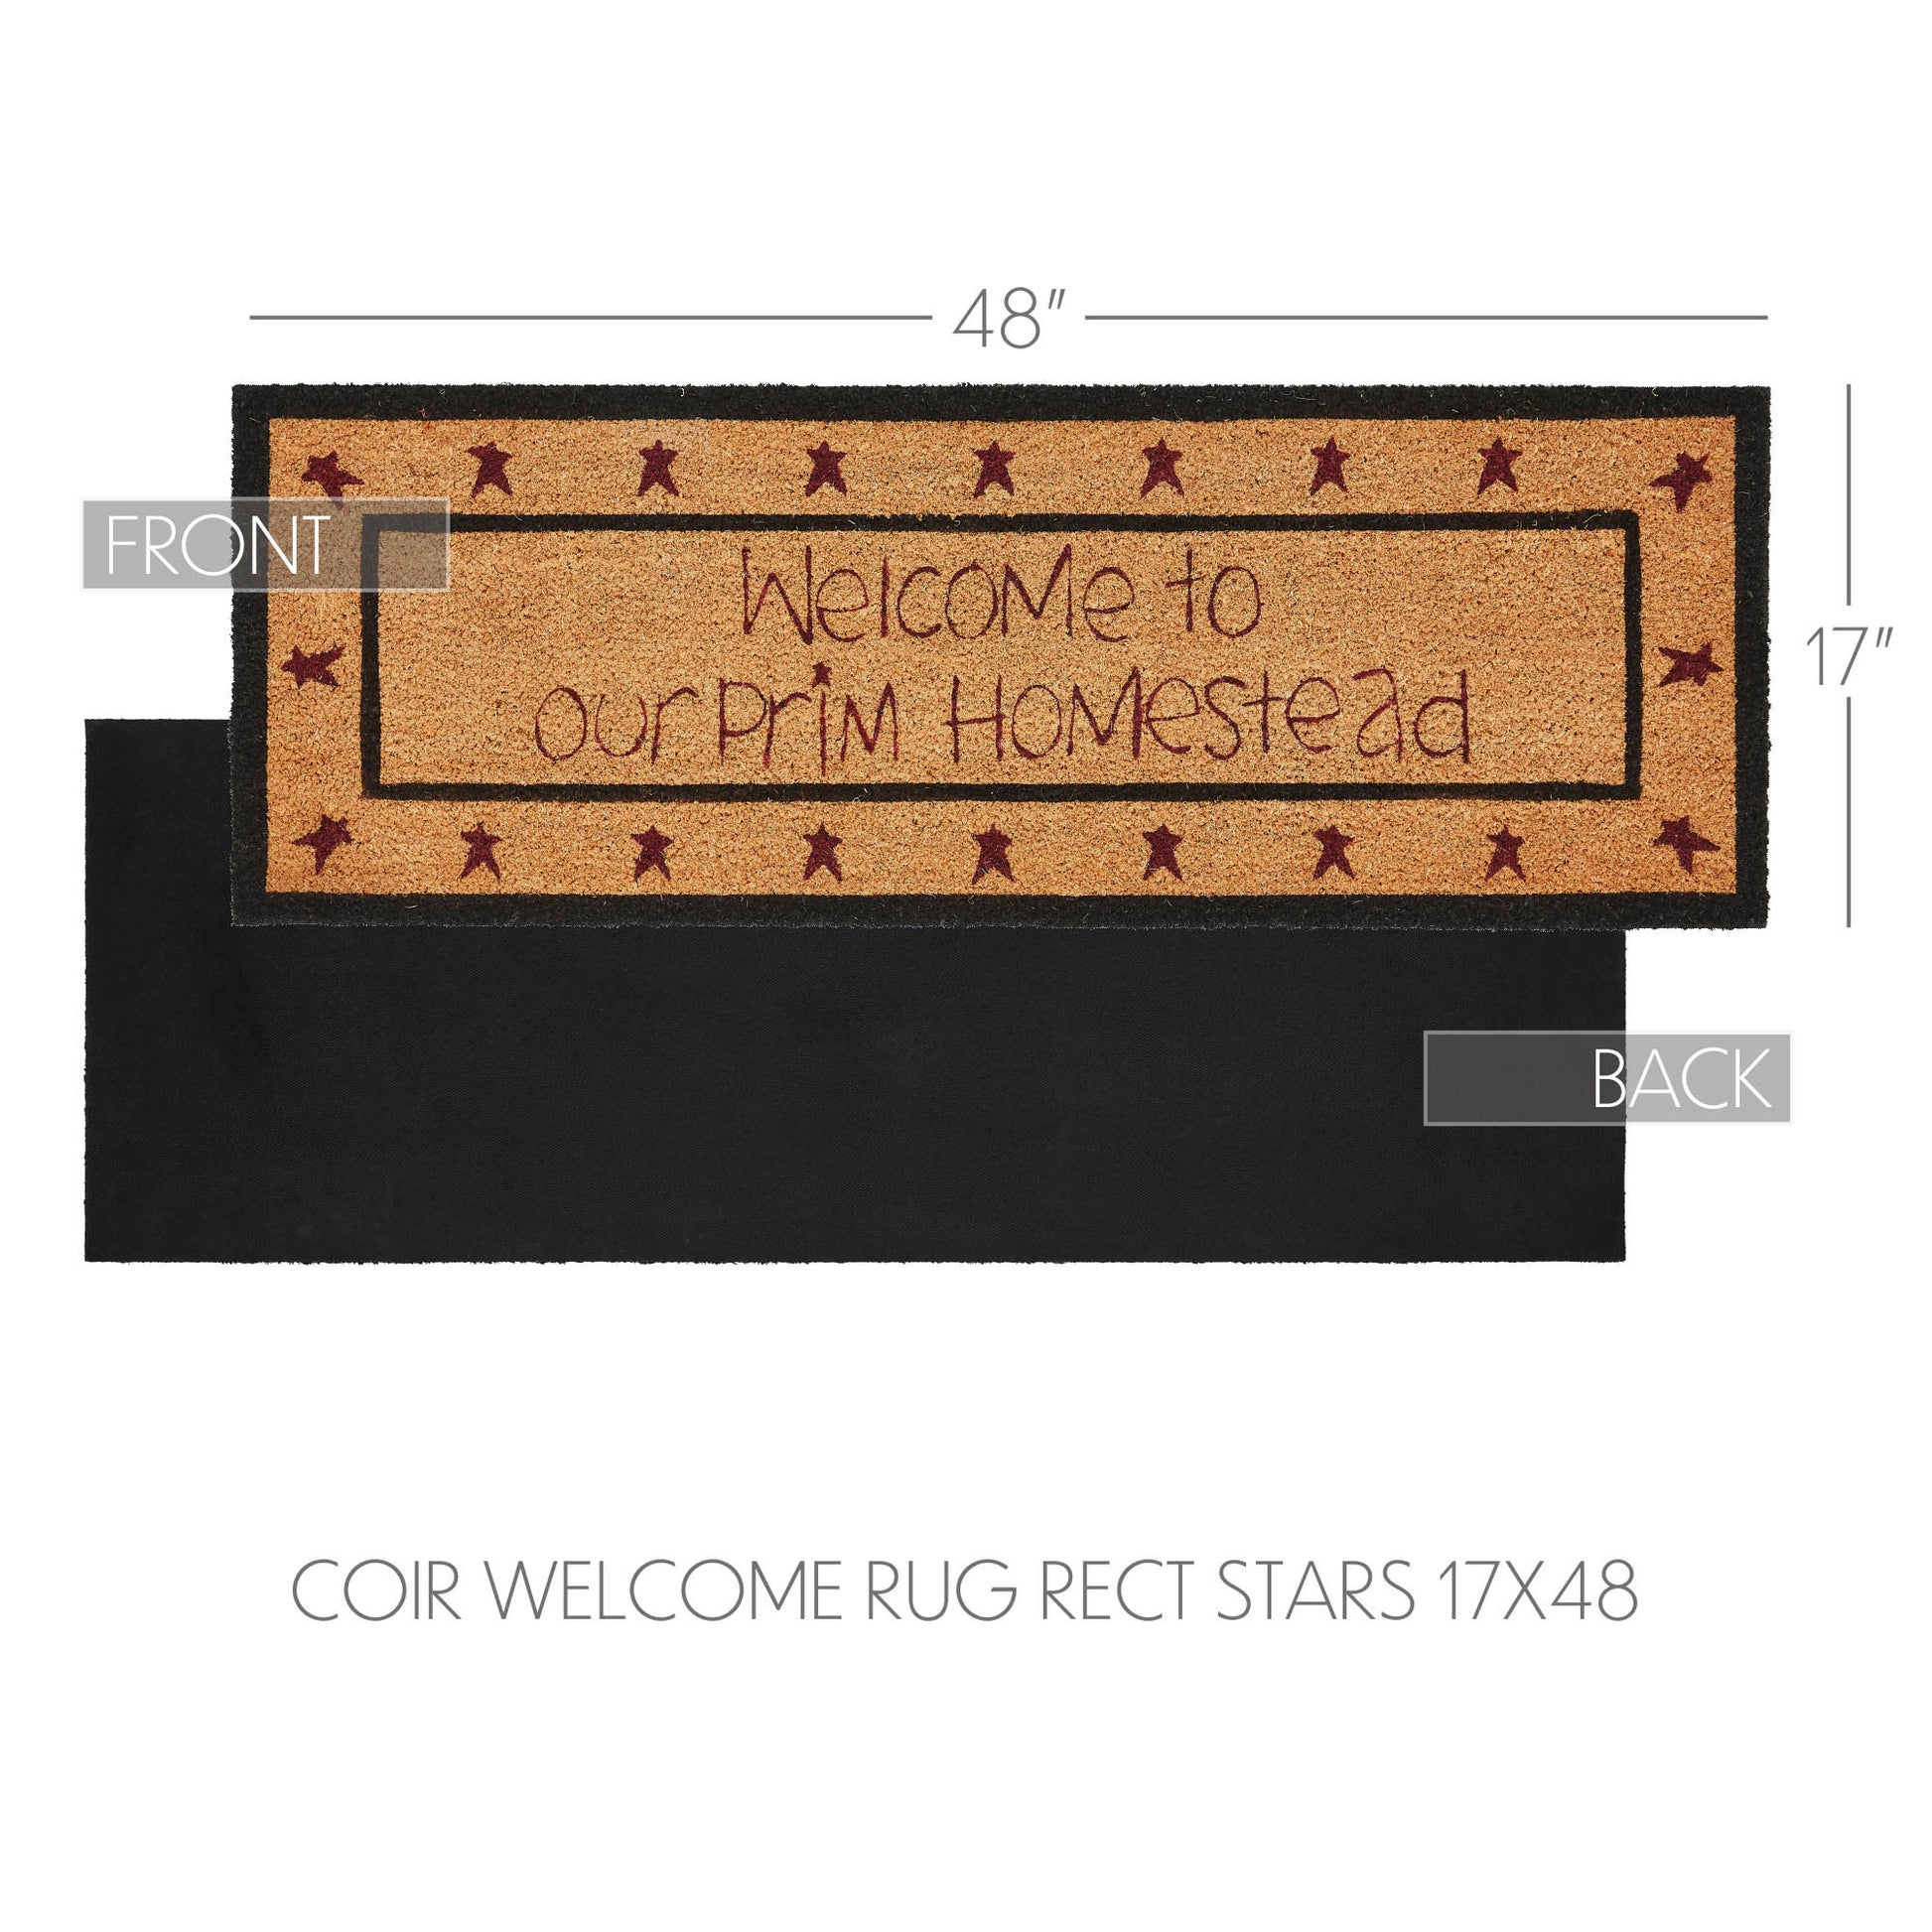 Connell Coir Welcome Rug Rect Stars 17x48 SpadezStore